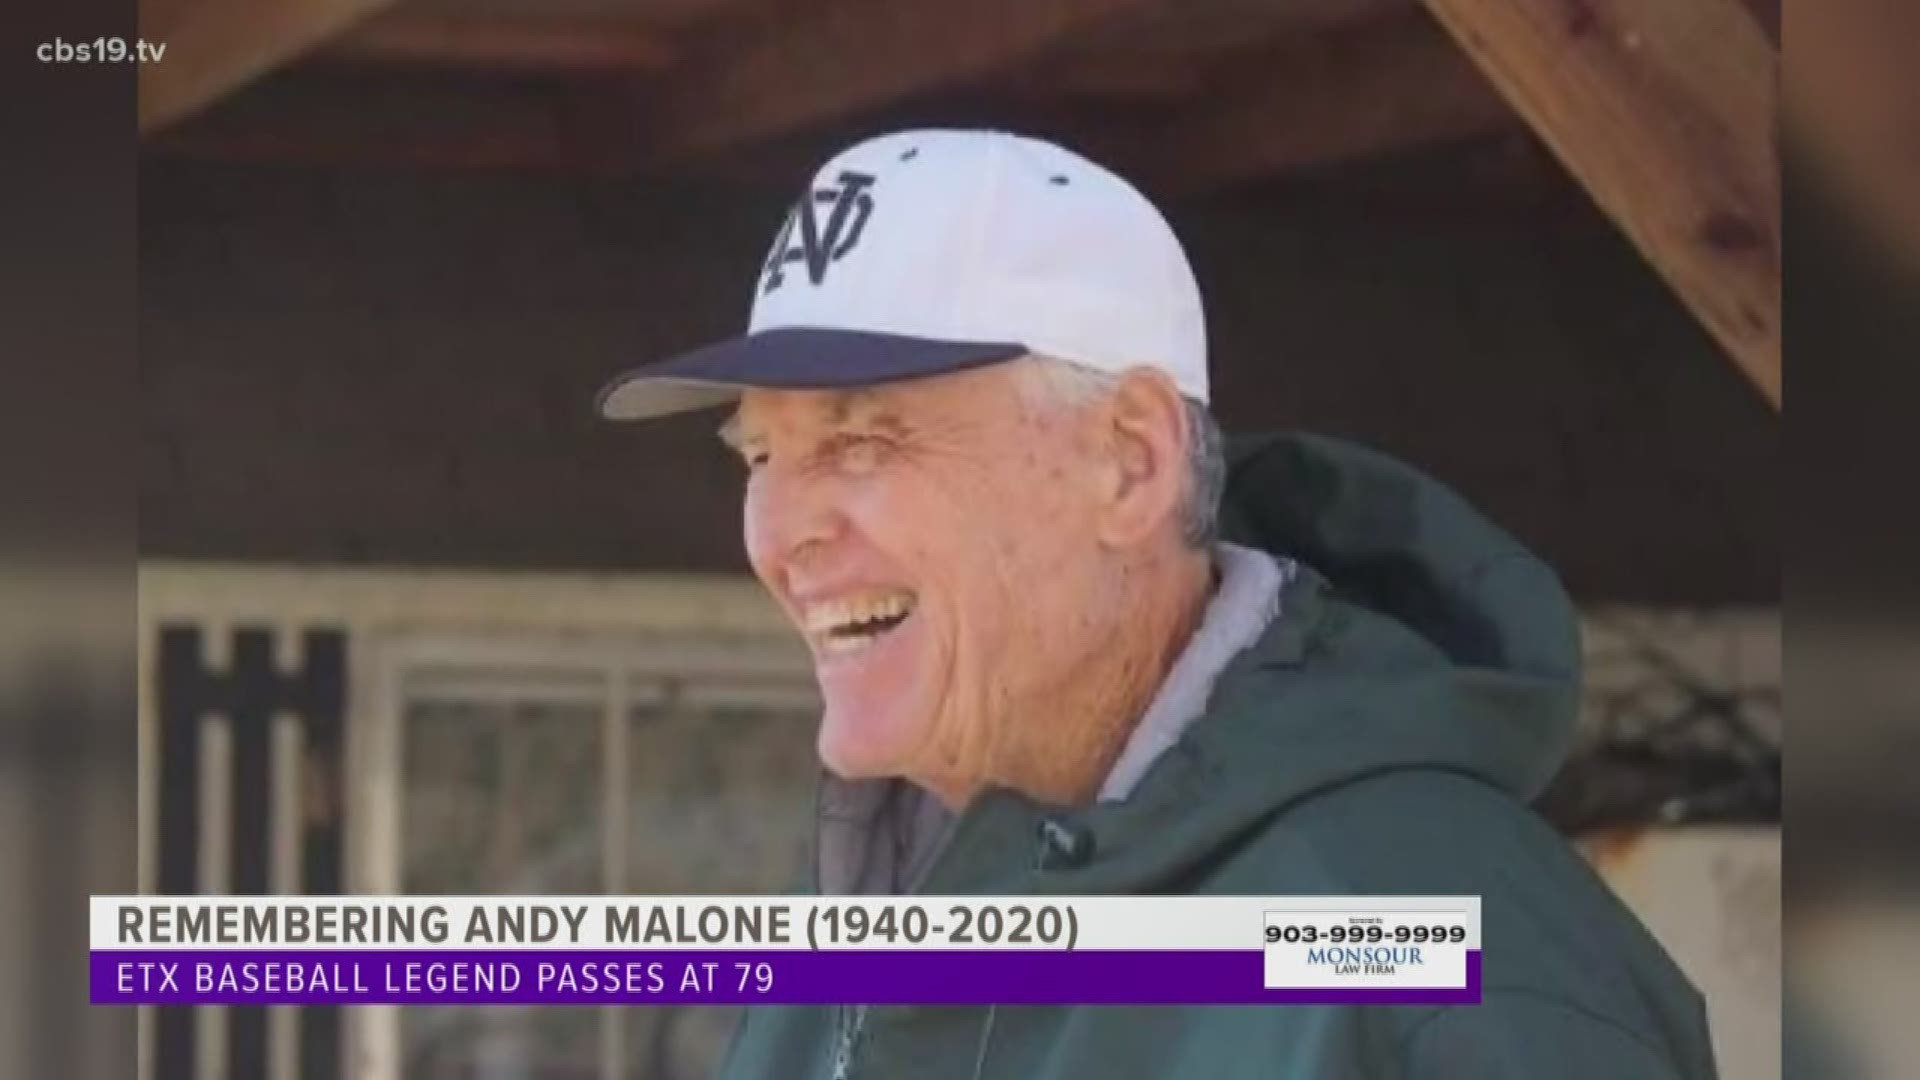 Scott Malone, the head baseball coach at Texas A&M-Corpus Christi, remembers the legacy of his father, former Texas A&M coach Andy Malone.